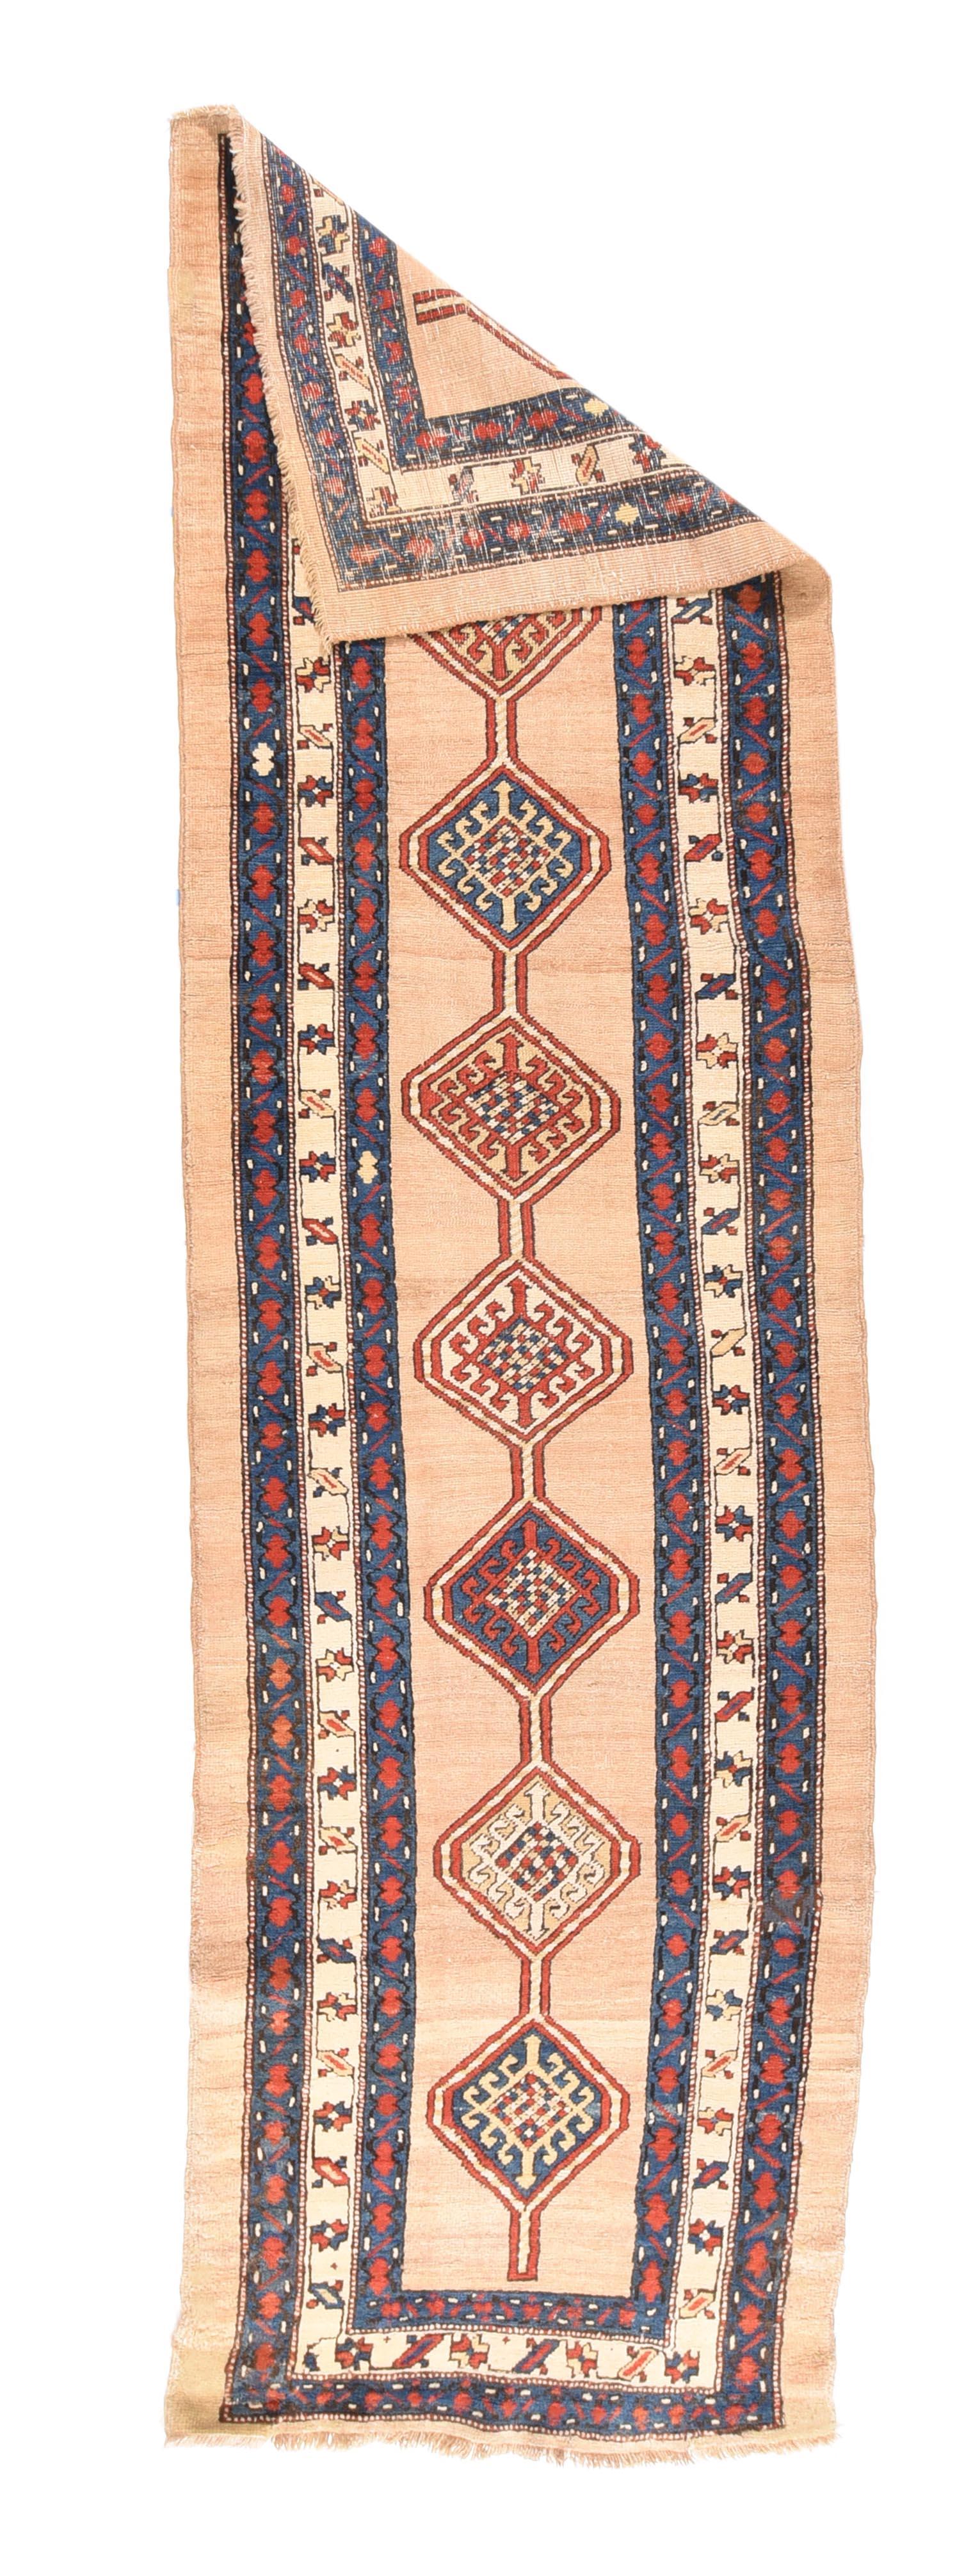 Antique Sarab Runner 3' x 10'8''. Light camel tone plain field is centred by an eight conjoint hexagon floating pole medallion, accented in red, straw, teal and ecru. Ecru main border of stars and tilted bars. Plain outer surround of milky camel.